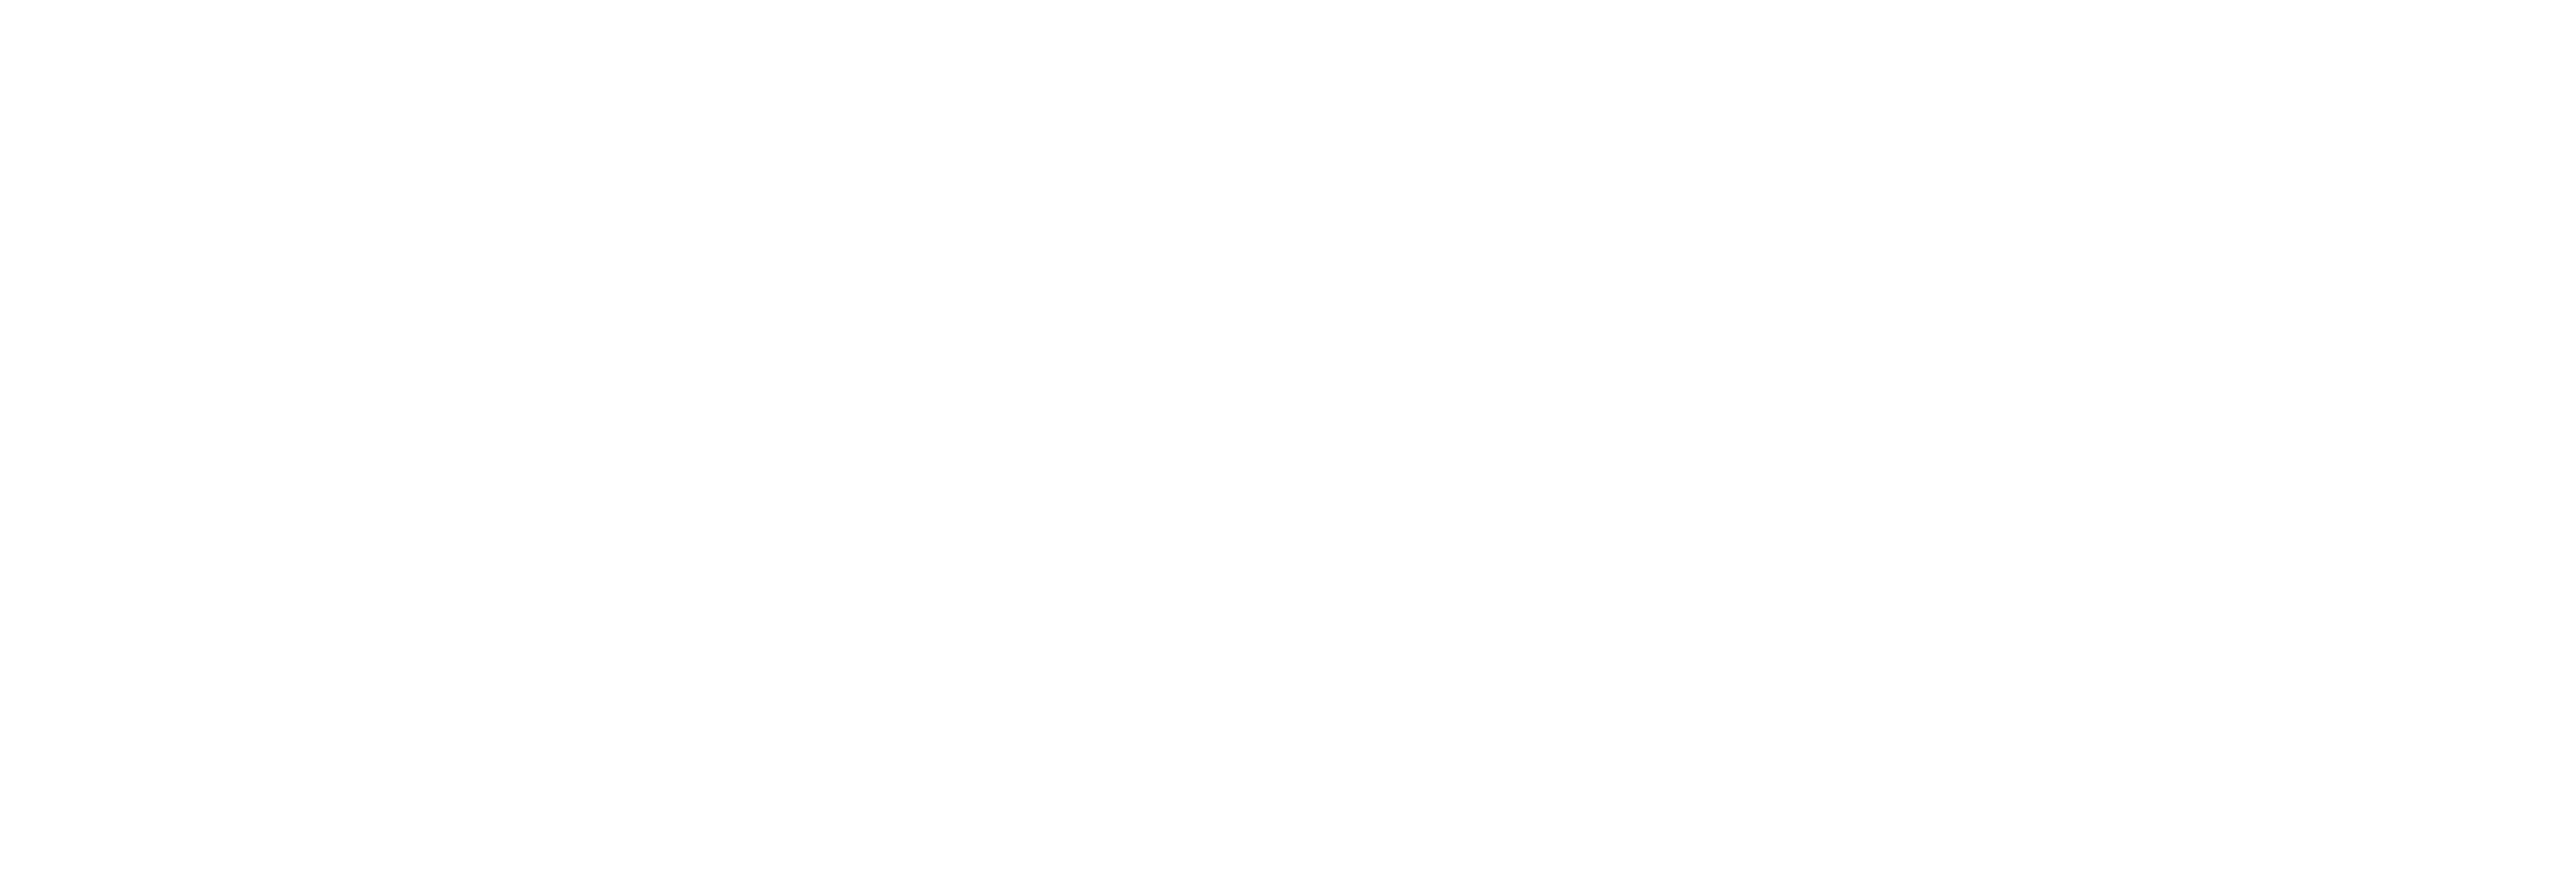 God of Gamblers 3: The Early Stage logo